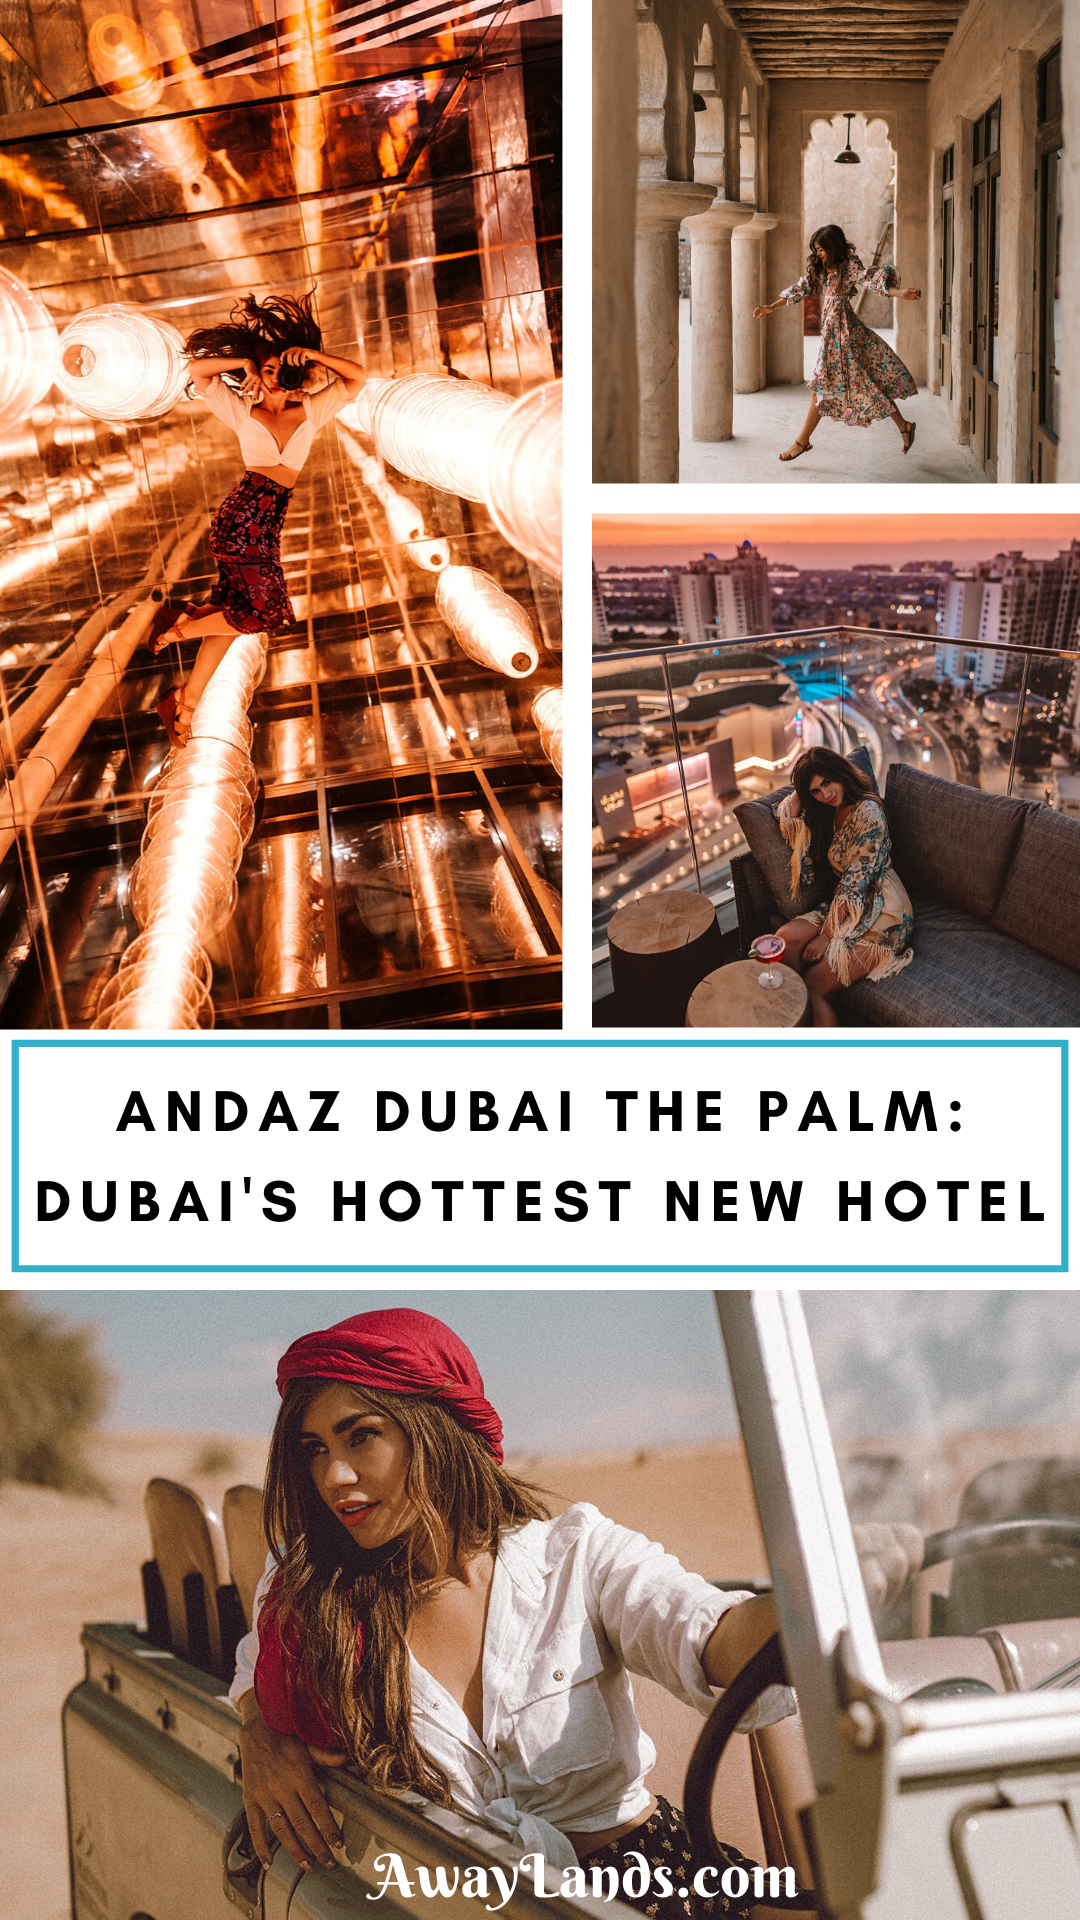 Andaz Dubai The Palm is Dubai's newest and hottest hotel with an amazing rooftop bar. Click here for a full review and video! #dubai #luxuryhotel #luxurytravel | Dubai hotel luxury | Dubai hotel interior | Dubai hotel room | Dubai hotel pool | Dubai hotel lobby | Dubai hotel view | Dubai hotel design | Dubai hotel beach | Dubai hotel photography | Dubai hotel Palm | Dubai travel things to do in | Dubai travel hotel | Dubai travel amazing views | Dubai travel where to stay | Dubai travel luxury